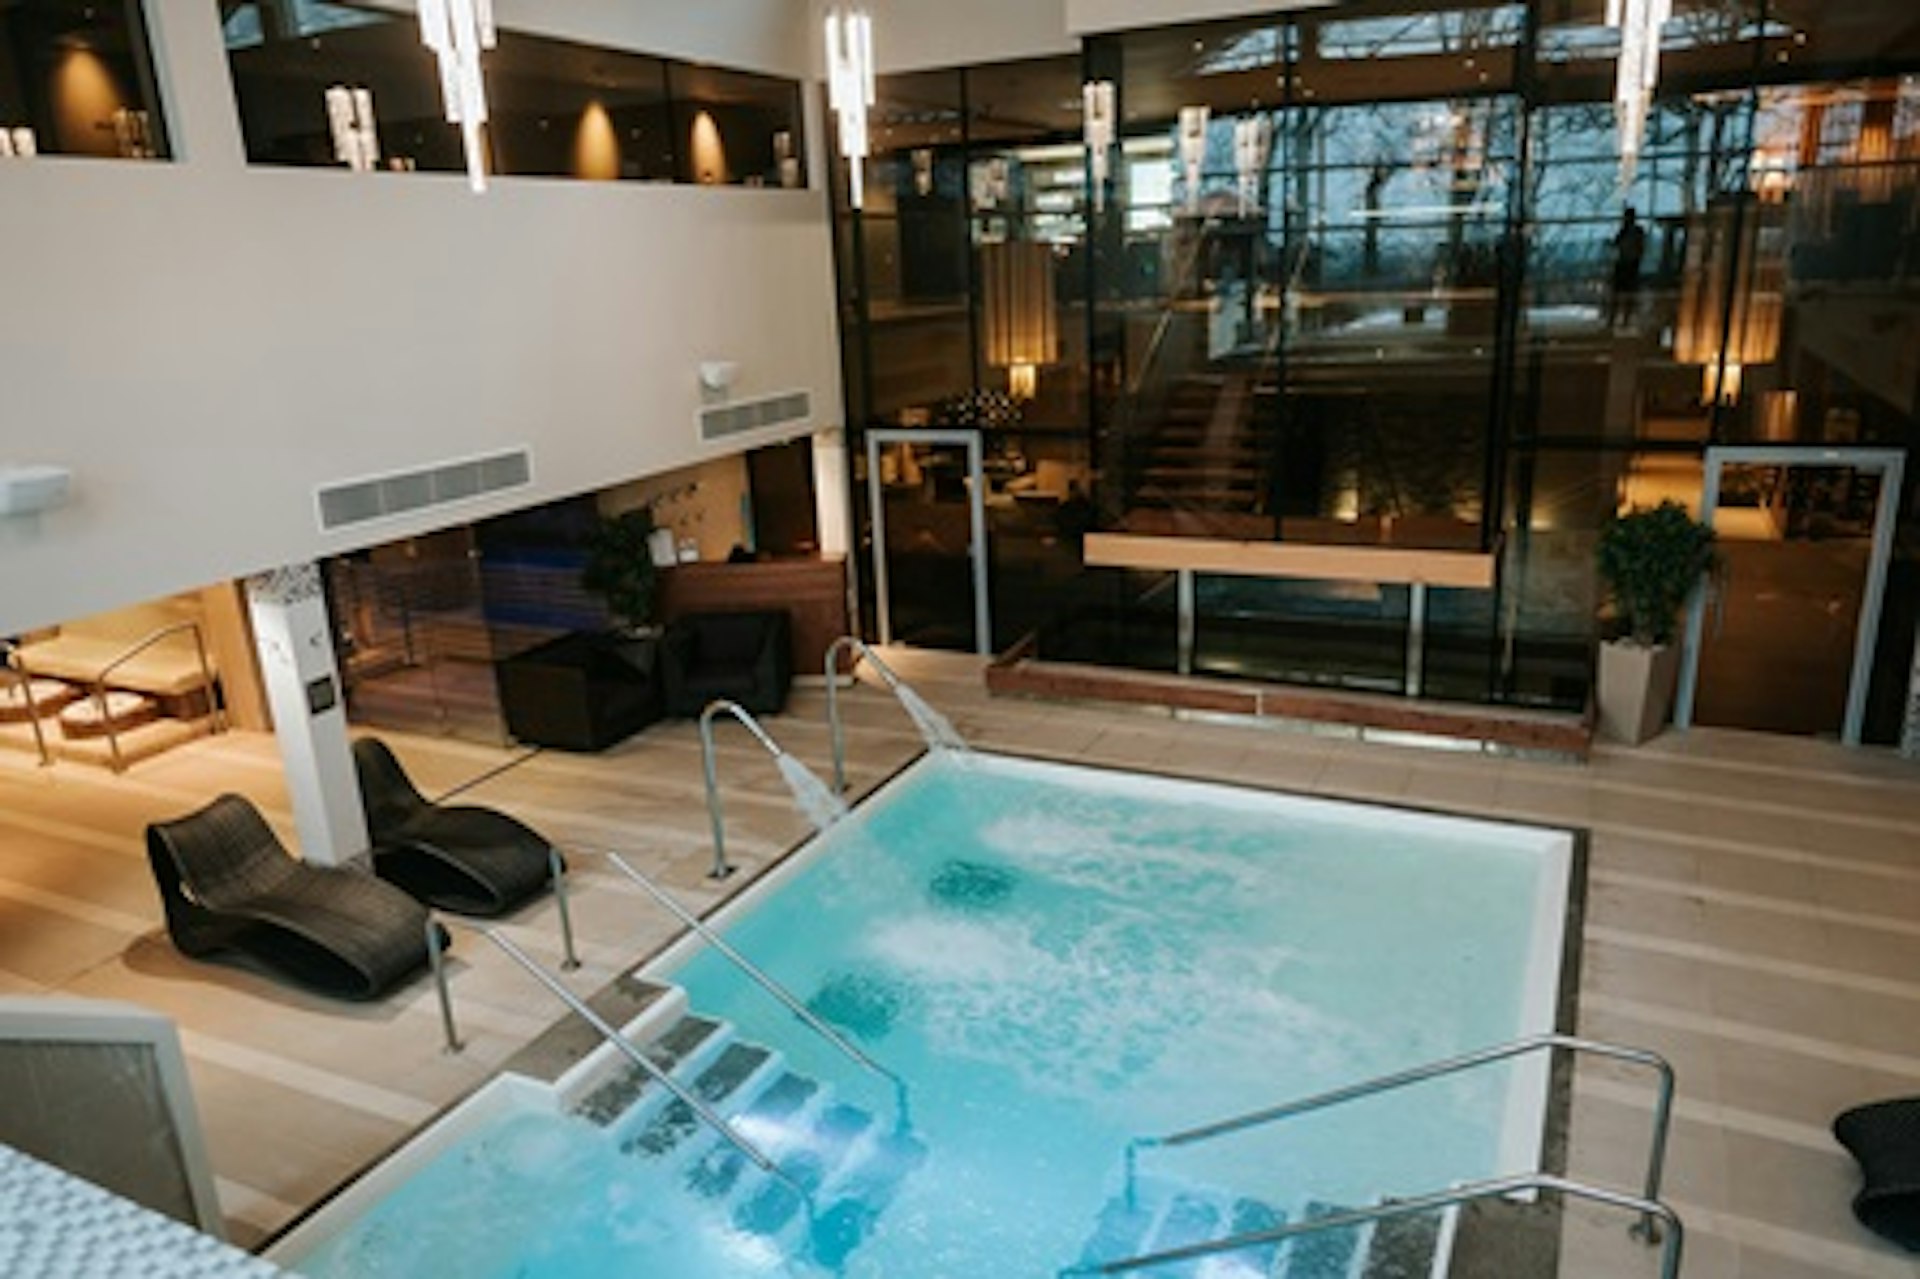 Weekday Aqua Thermal Journey with Afternoon Tea for Two at Ribby Hall Village 4